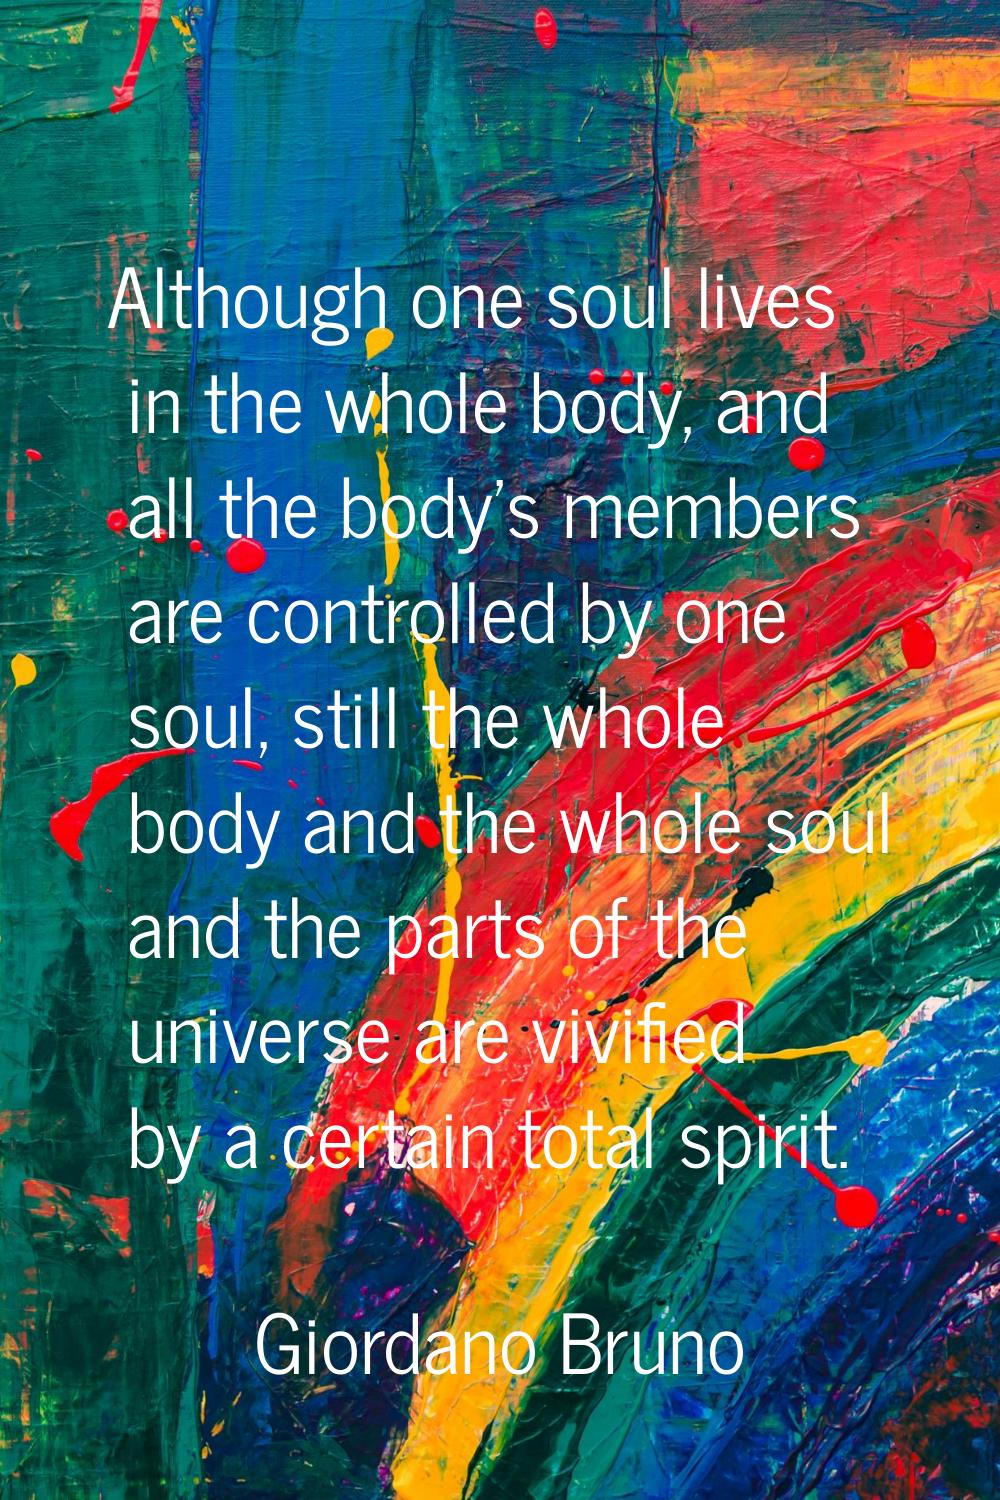 Although one soul lives in the whole body, and all the body's members are controlled by one soul, s